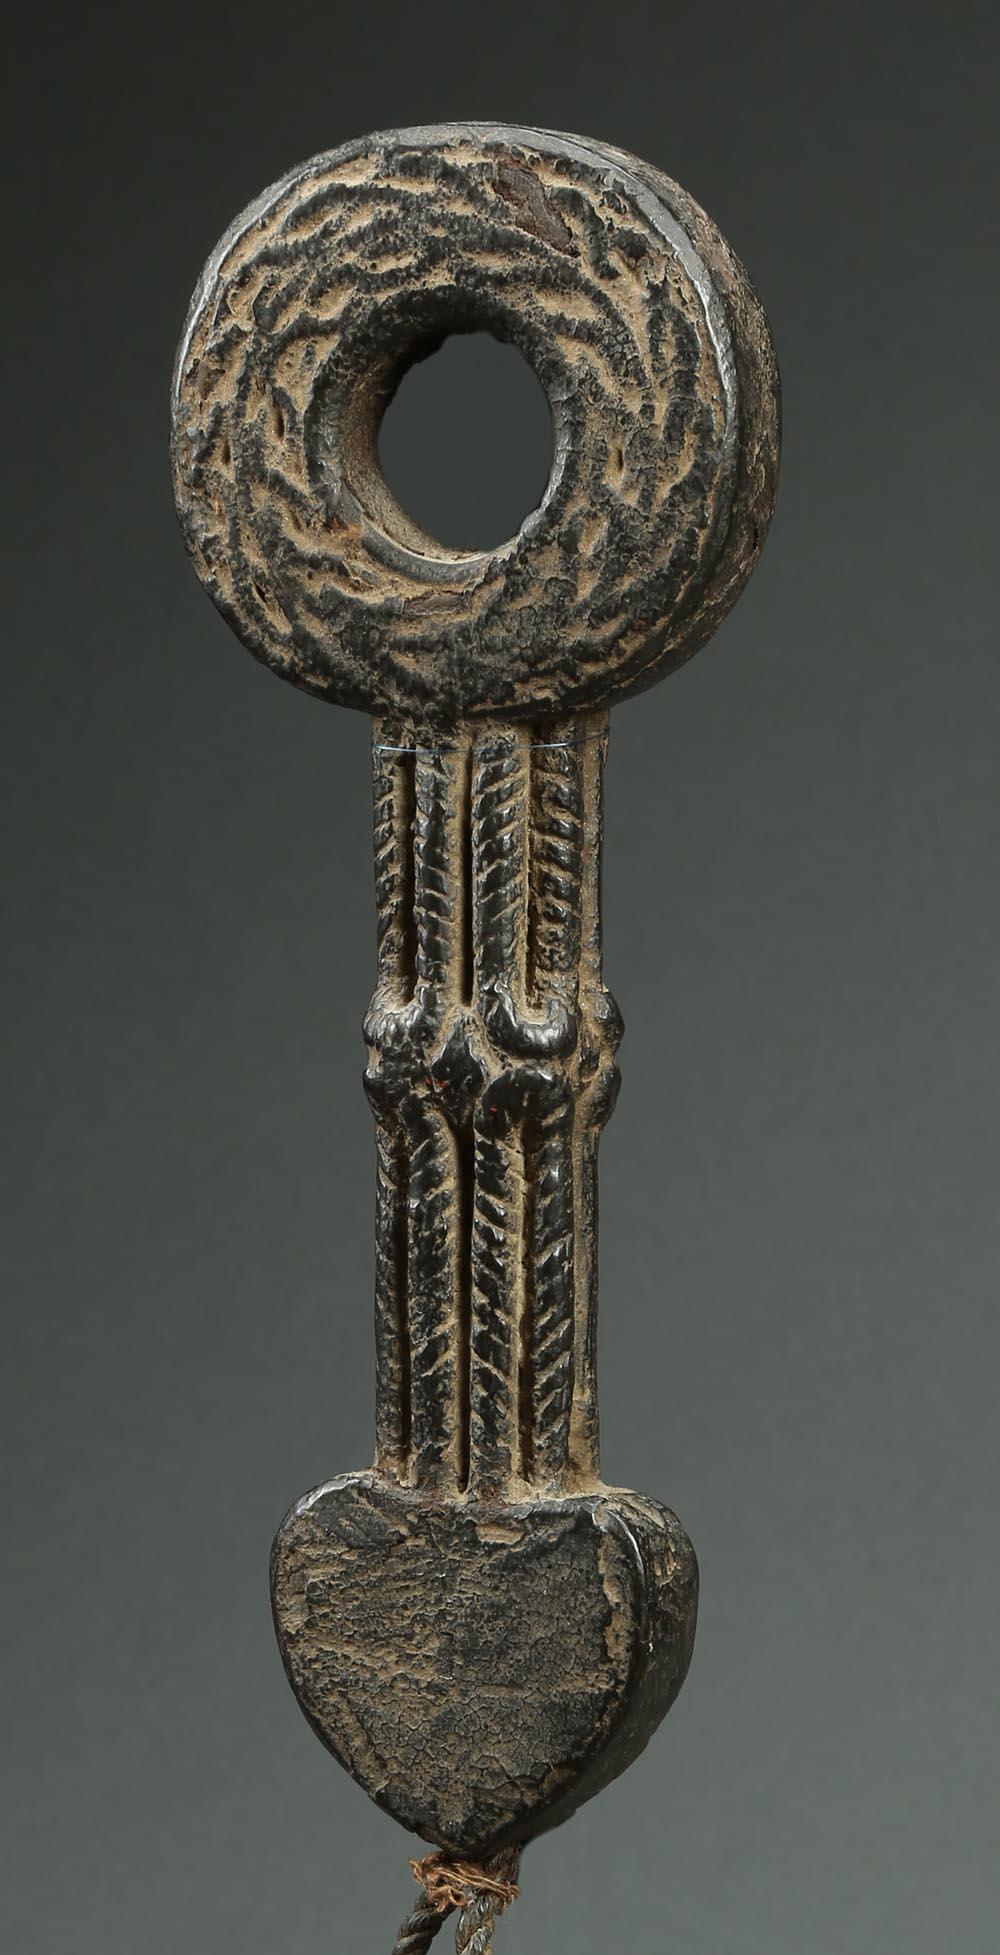 Tribal Nepal Himalayan Butter Churn Handle, Early 20th Century with Heart Shape For Sale